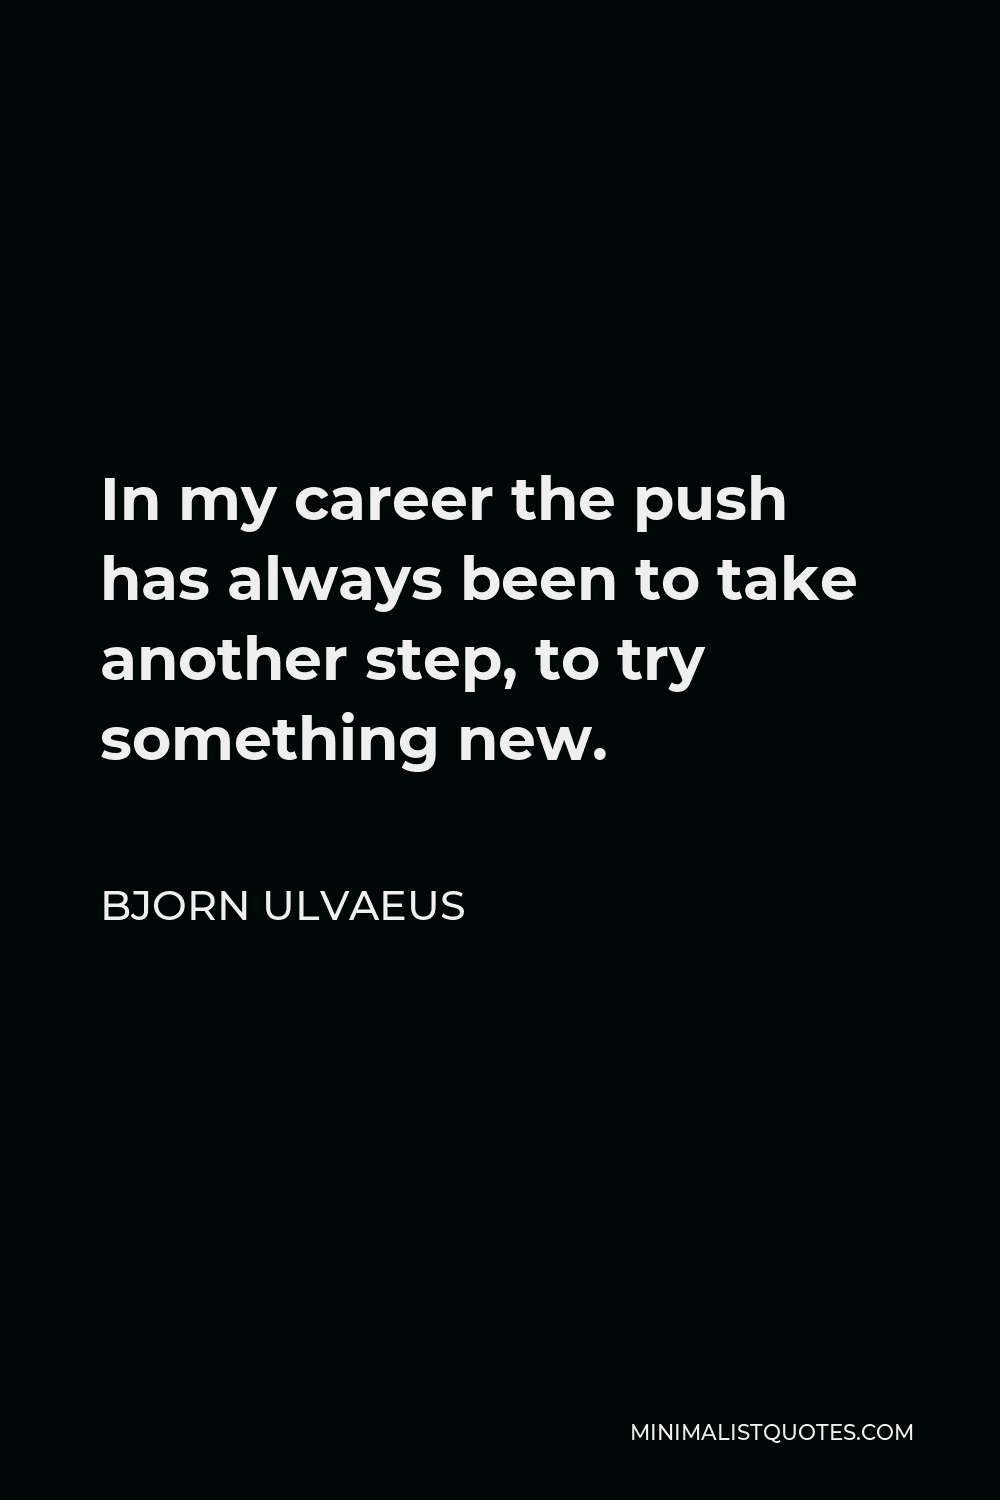 Bjorn Ulvaeus Quote - In my career the push has always been to take another step, to try something new.